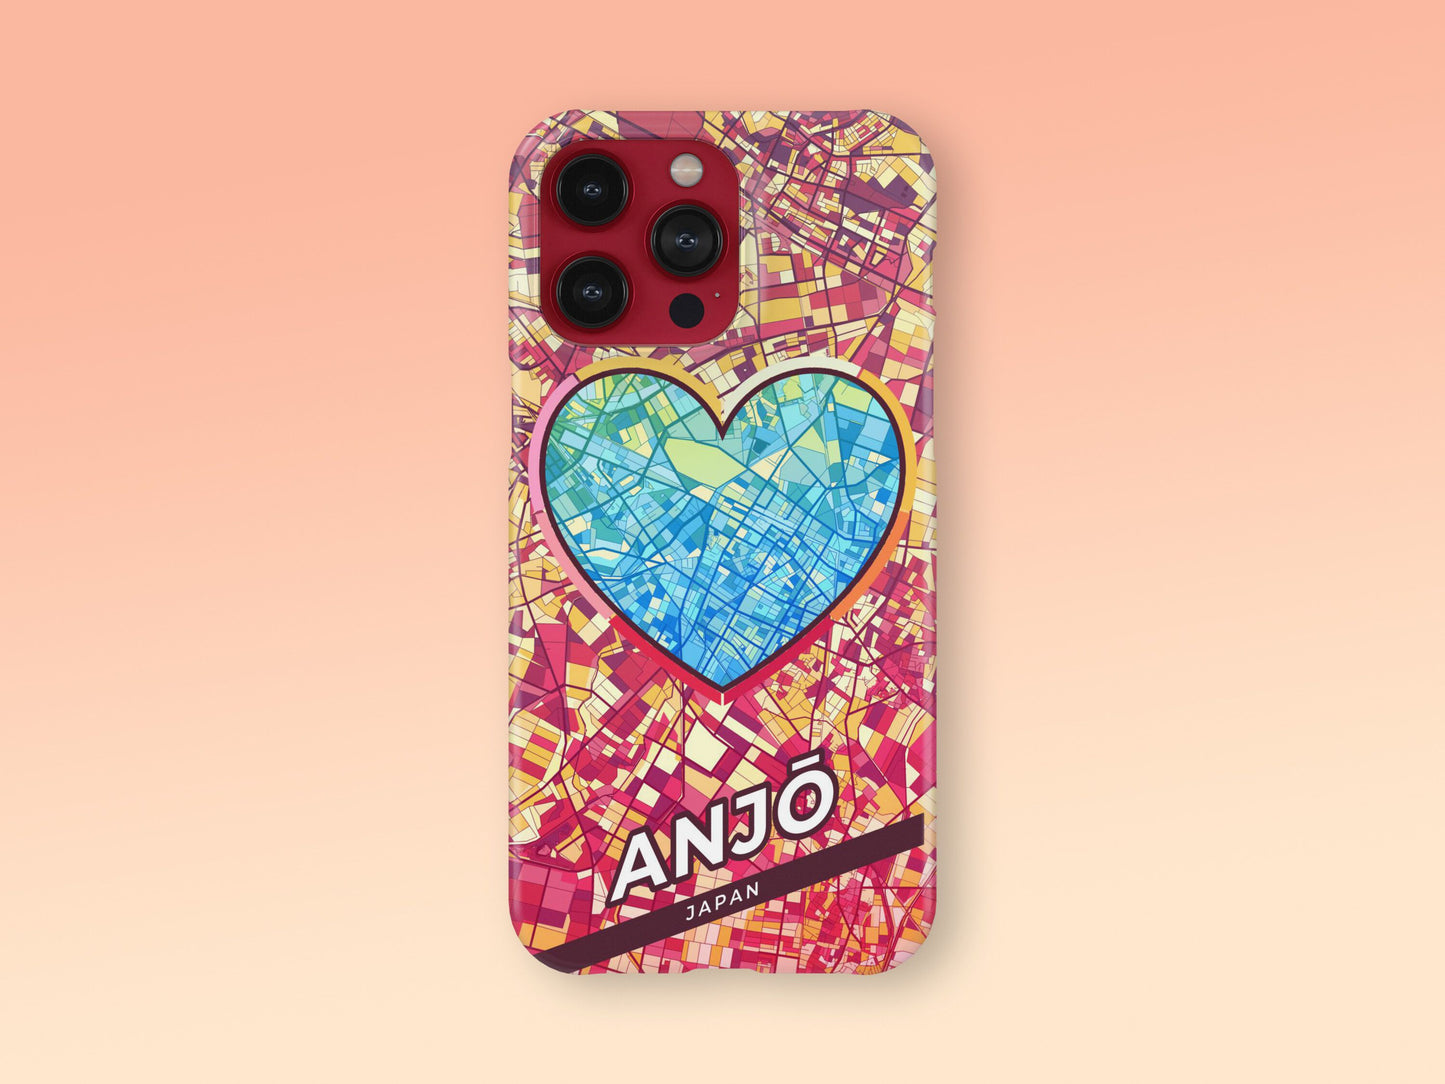 Anjō Japan slim phone case with colorful icon. Birthday, wedding or housewarming gift. Couple match cases. 2